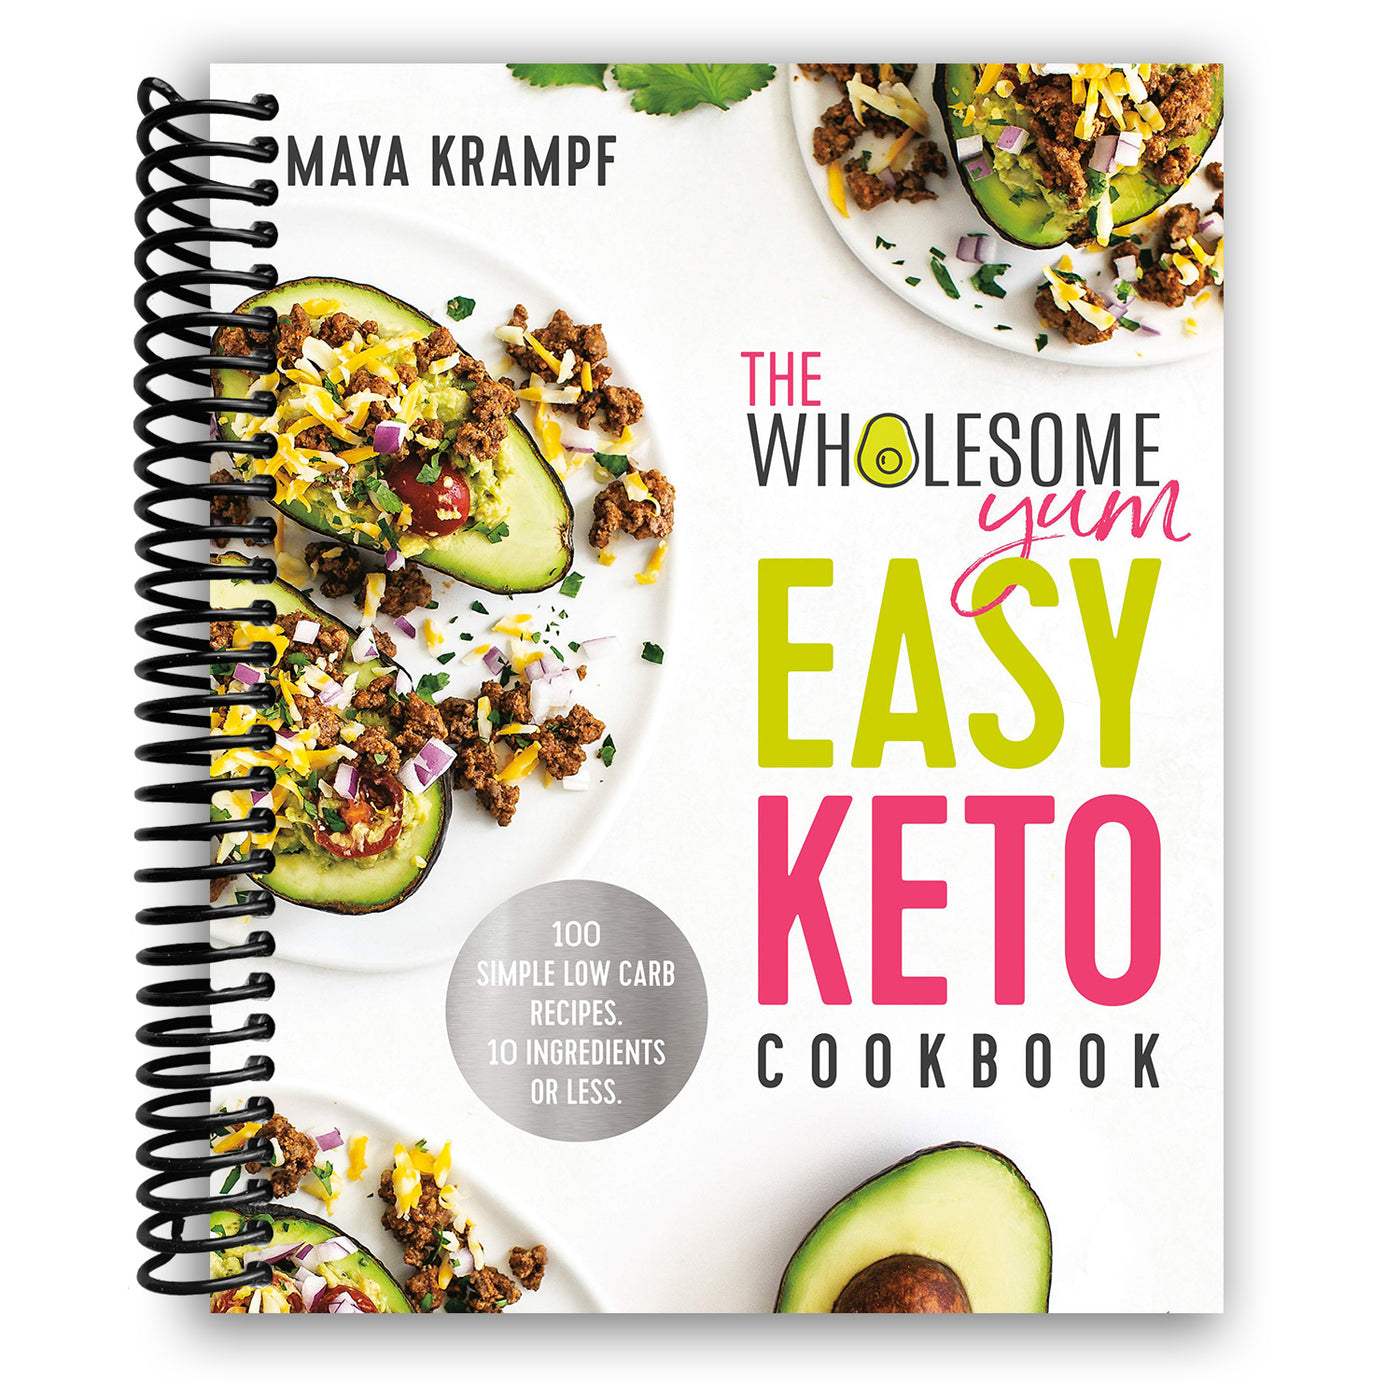 The Wholesome Yum Easy Keto Cookbook: 100 Simple Low Carb Recipes. 10 Ingredients or Less (Spiral Bound)